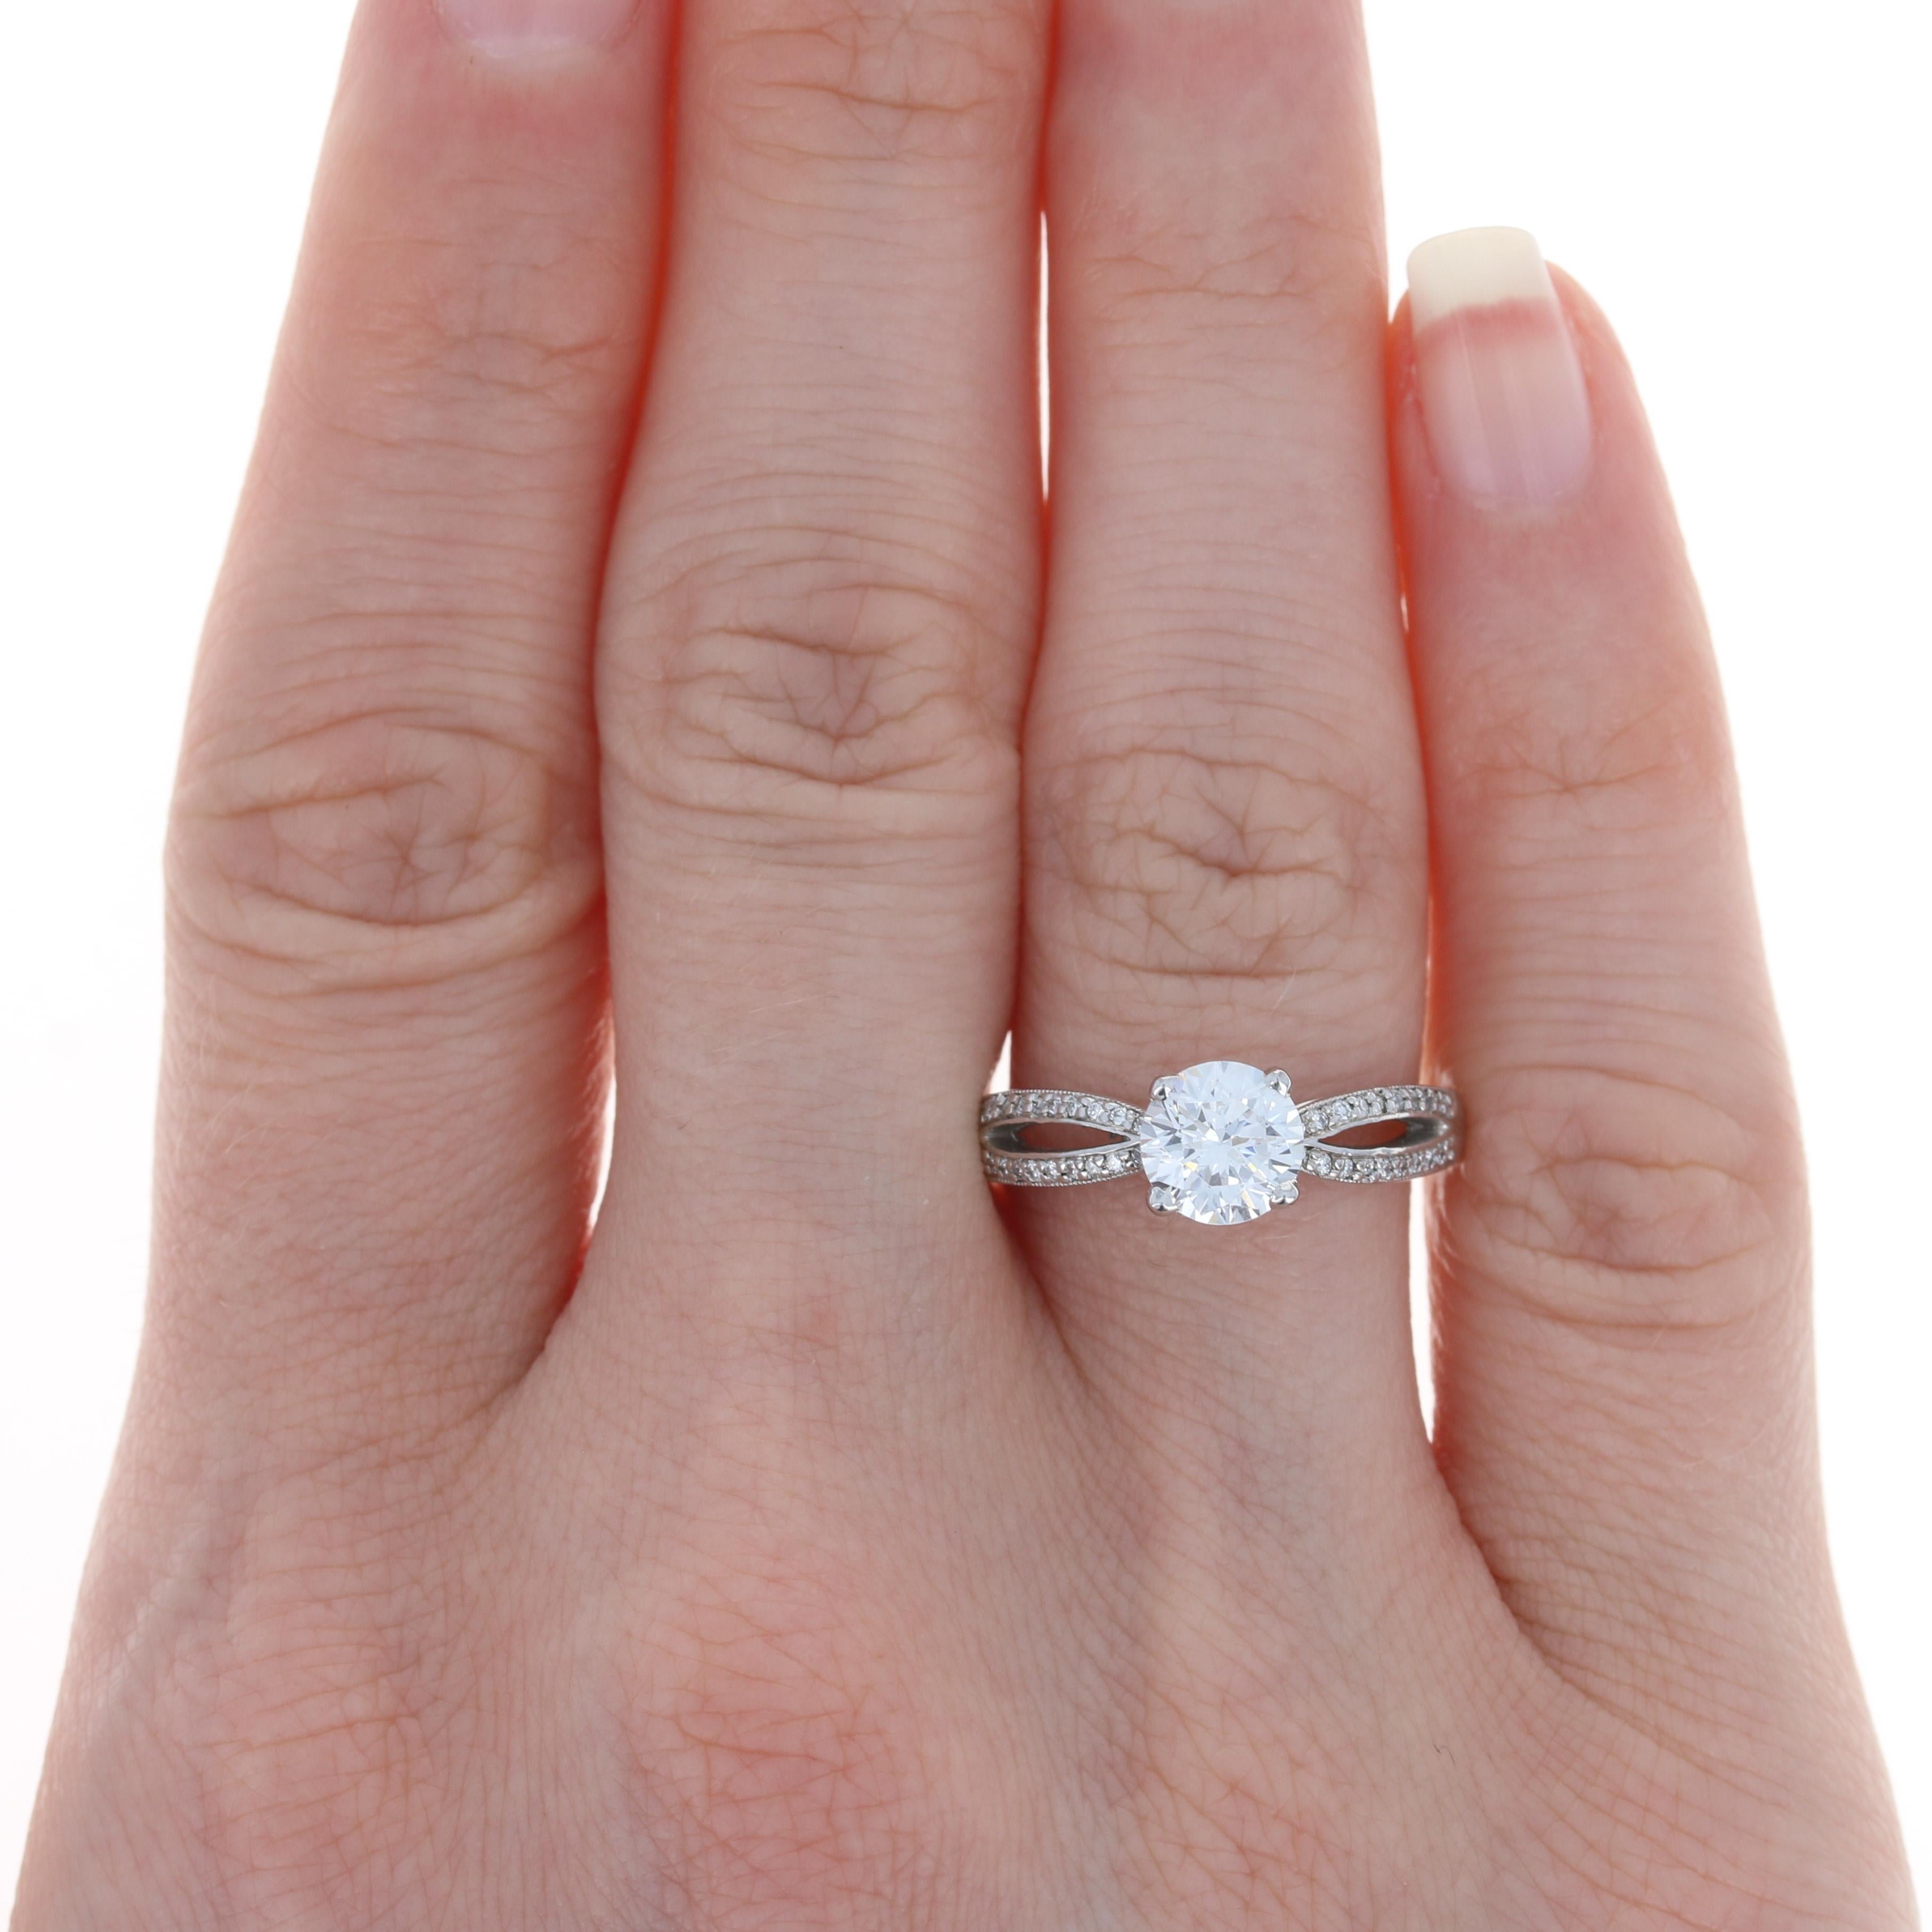 Showcase your beautiful diamond or heirloom gemstone in an elegant band! Created by Scott Kay in 19k white gold and featuring natural diamond accents, this stylish semi-mount will accommodate a diamond or gemstone solitaire measuring approximately